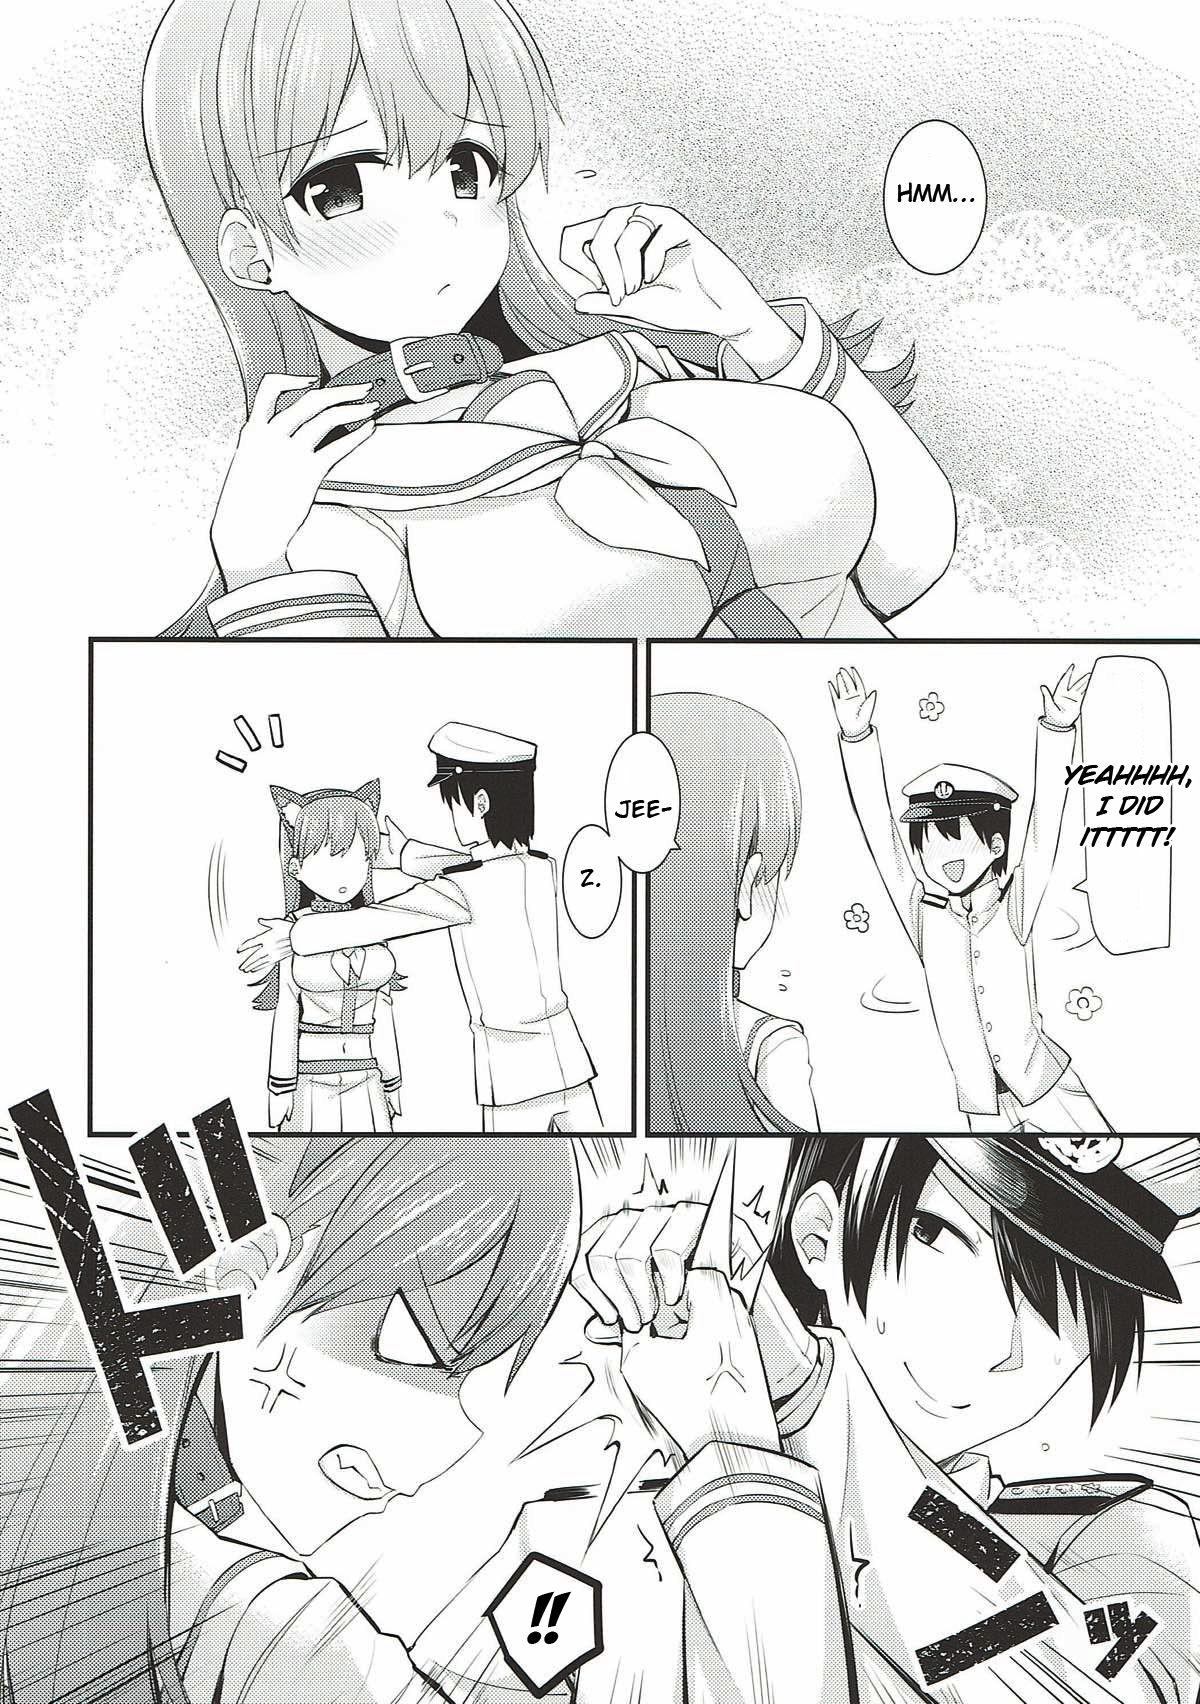 Rubbing Ooi! Nekomimi o Tsukeyou! | Ooi! Put On These Cat Ears! - Kantai collection Camsex - Page 7